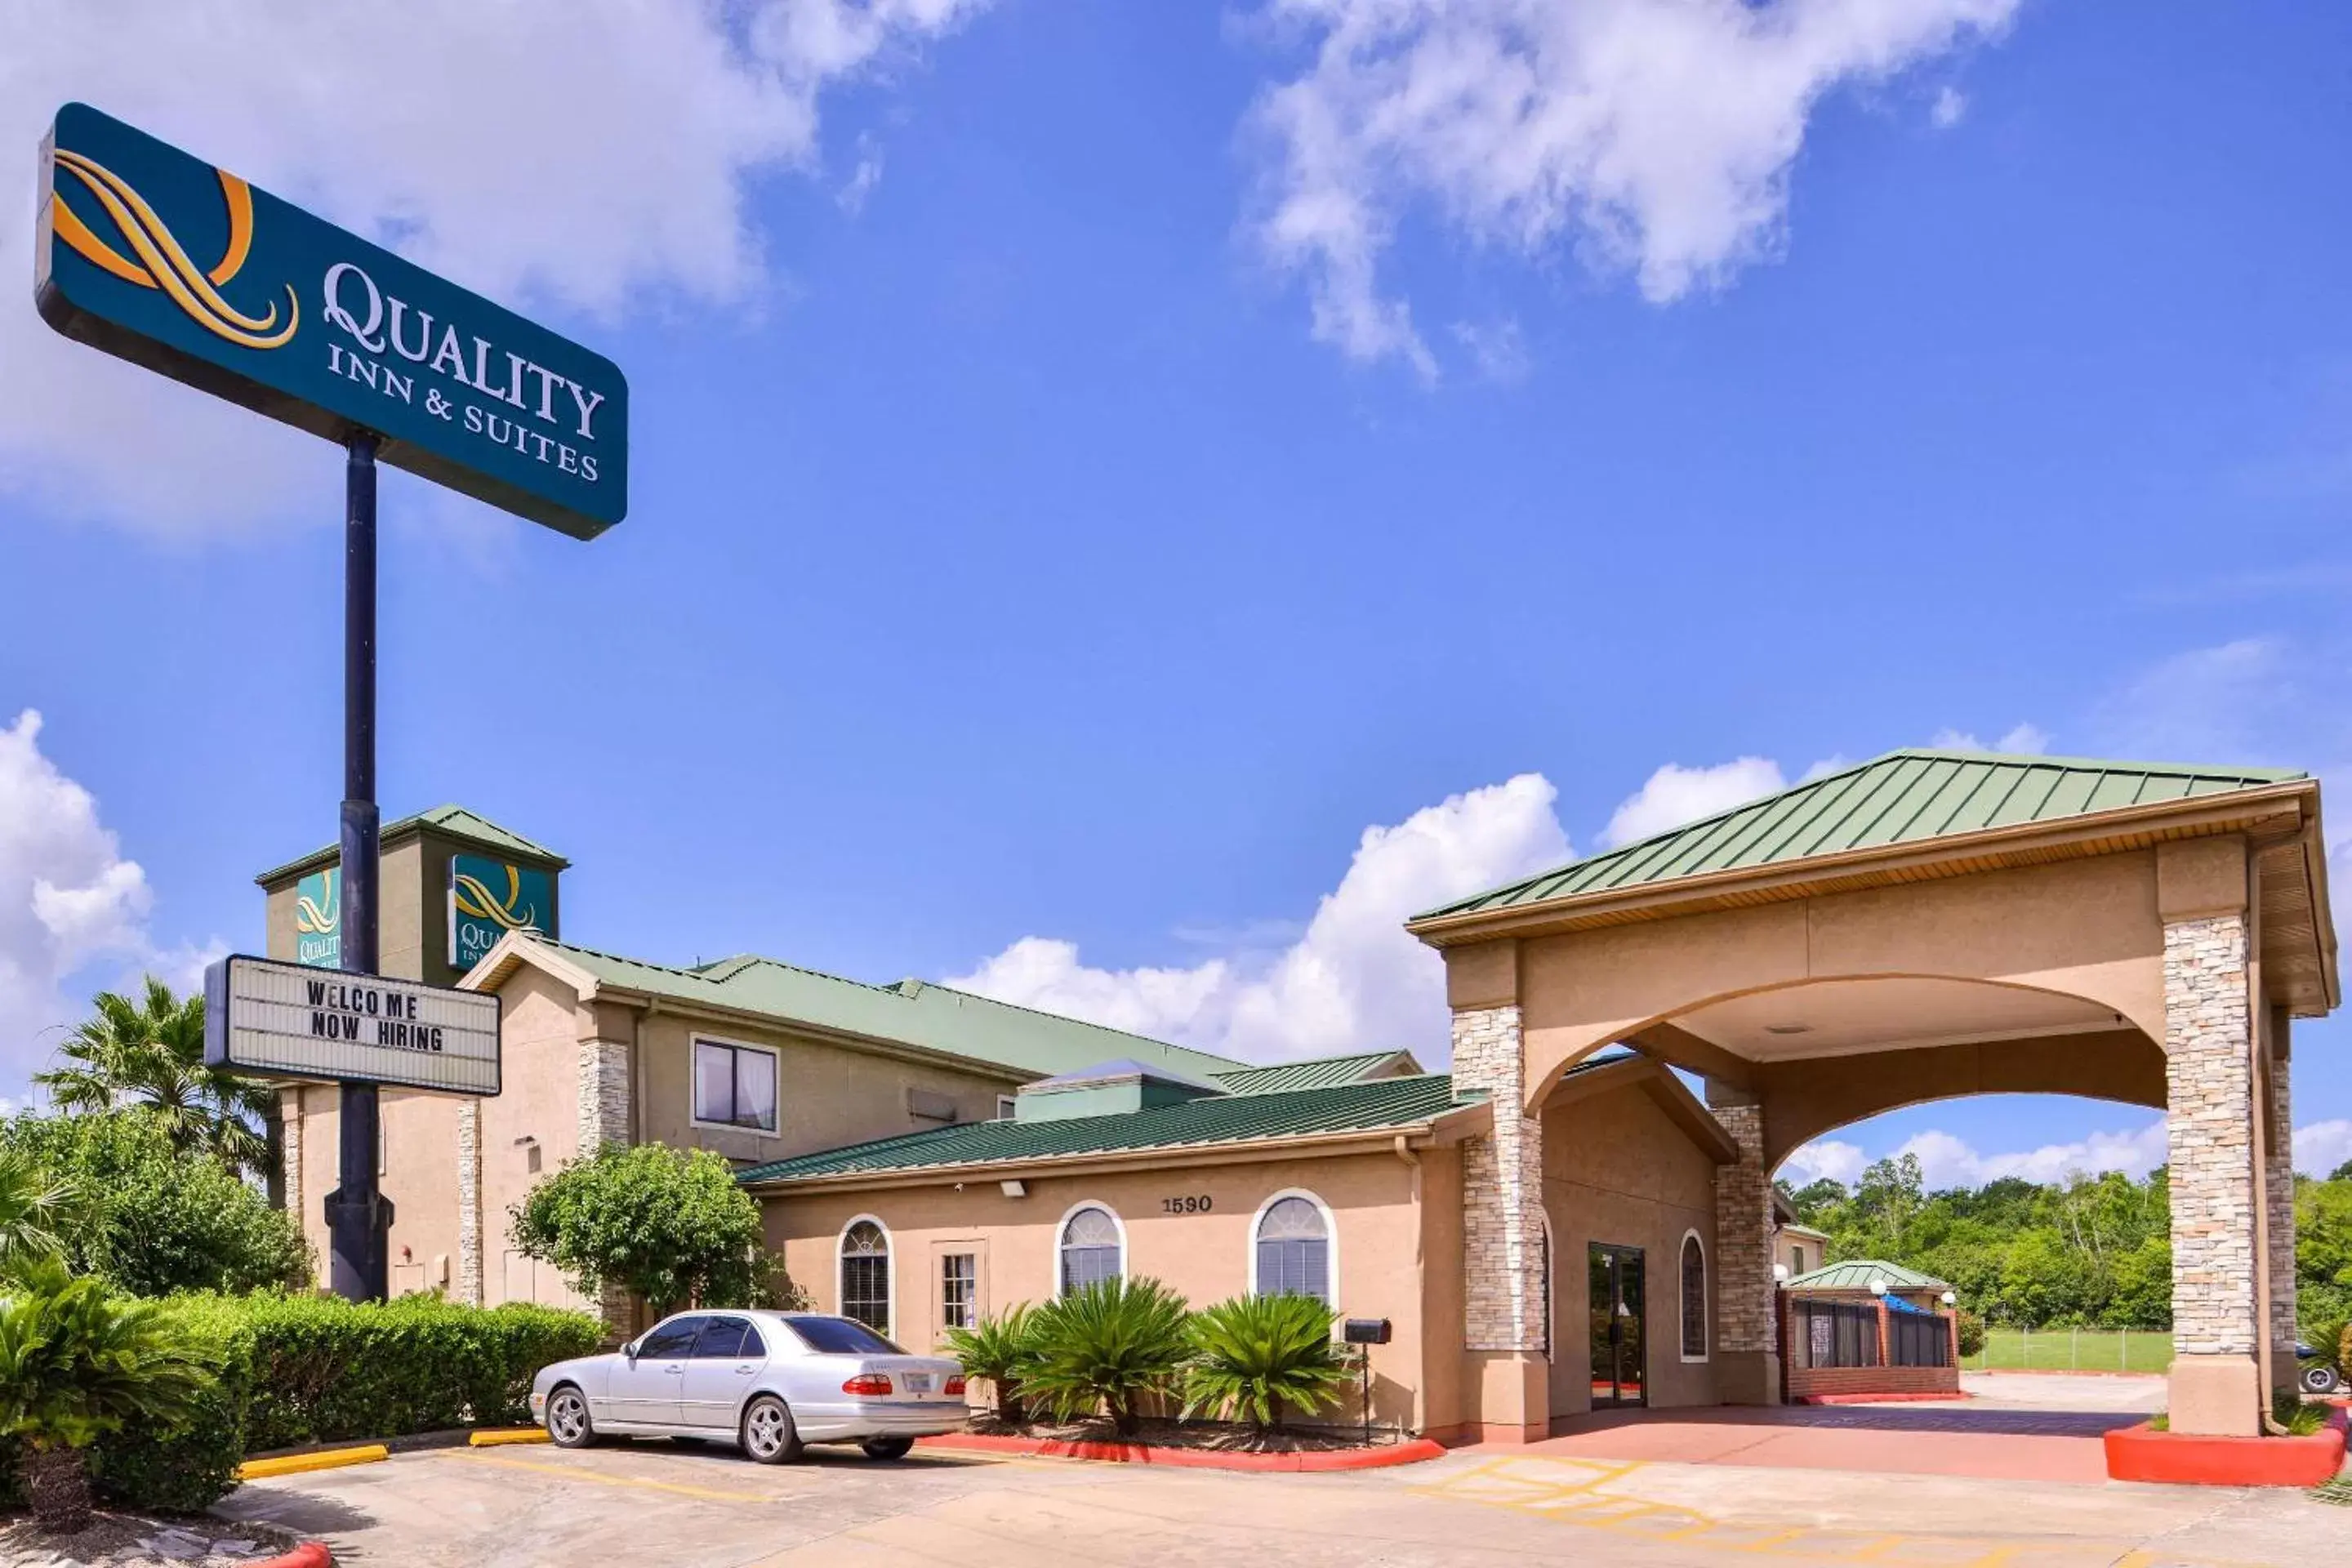 Property building in Quality Inn and Suites Beaumont